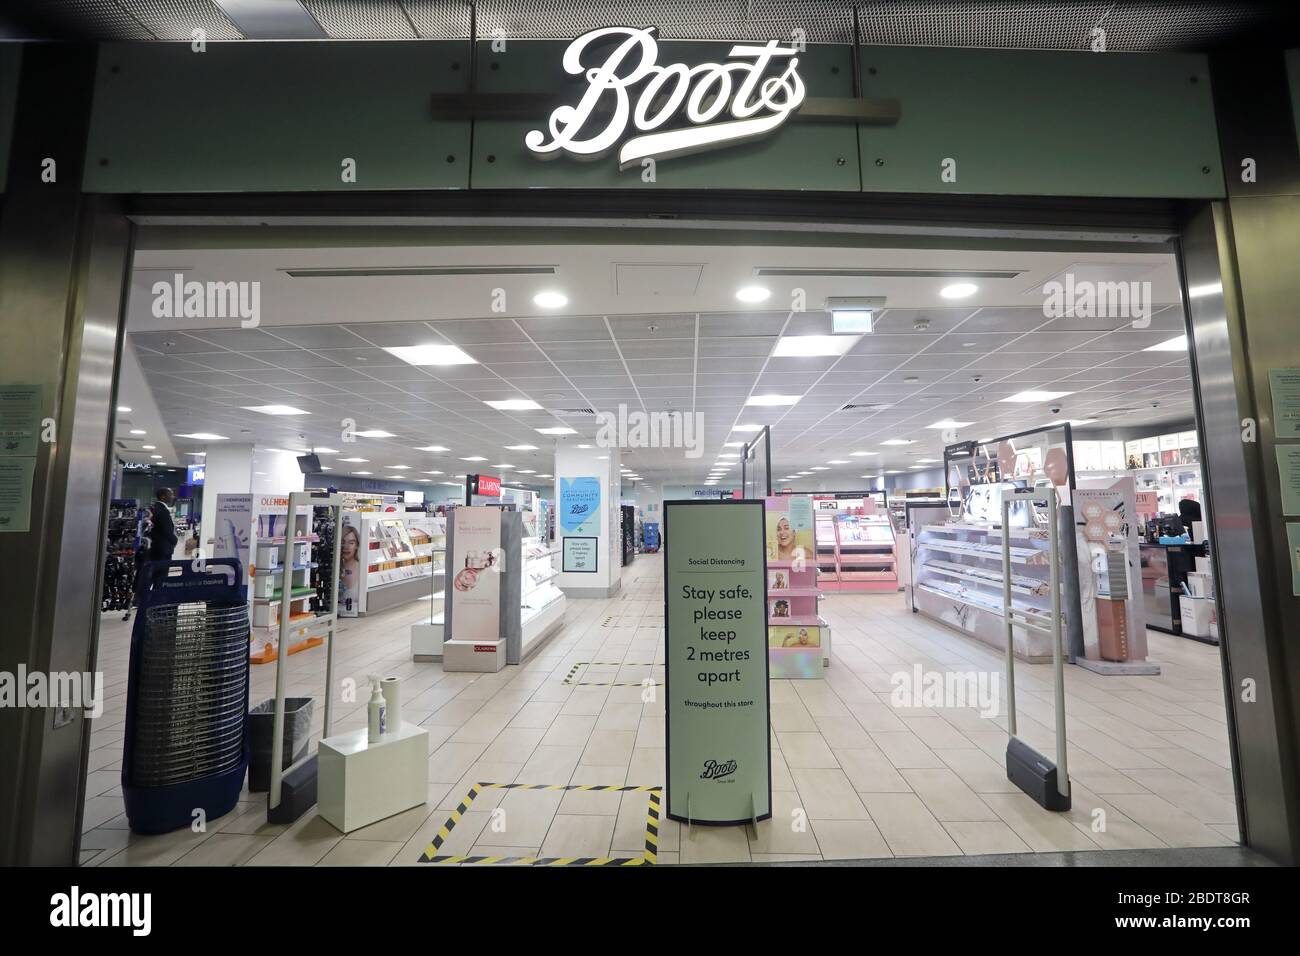 boots uk limited